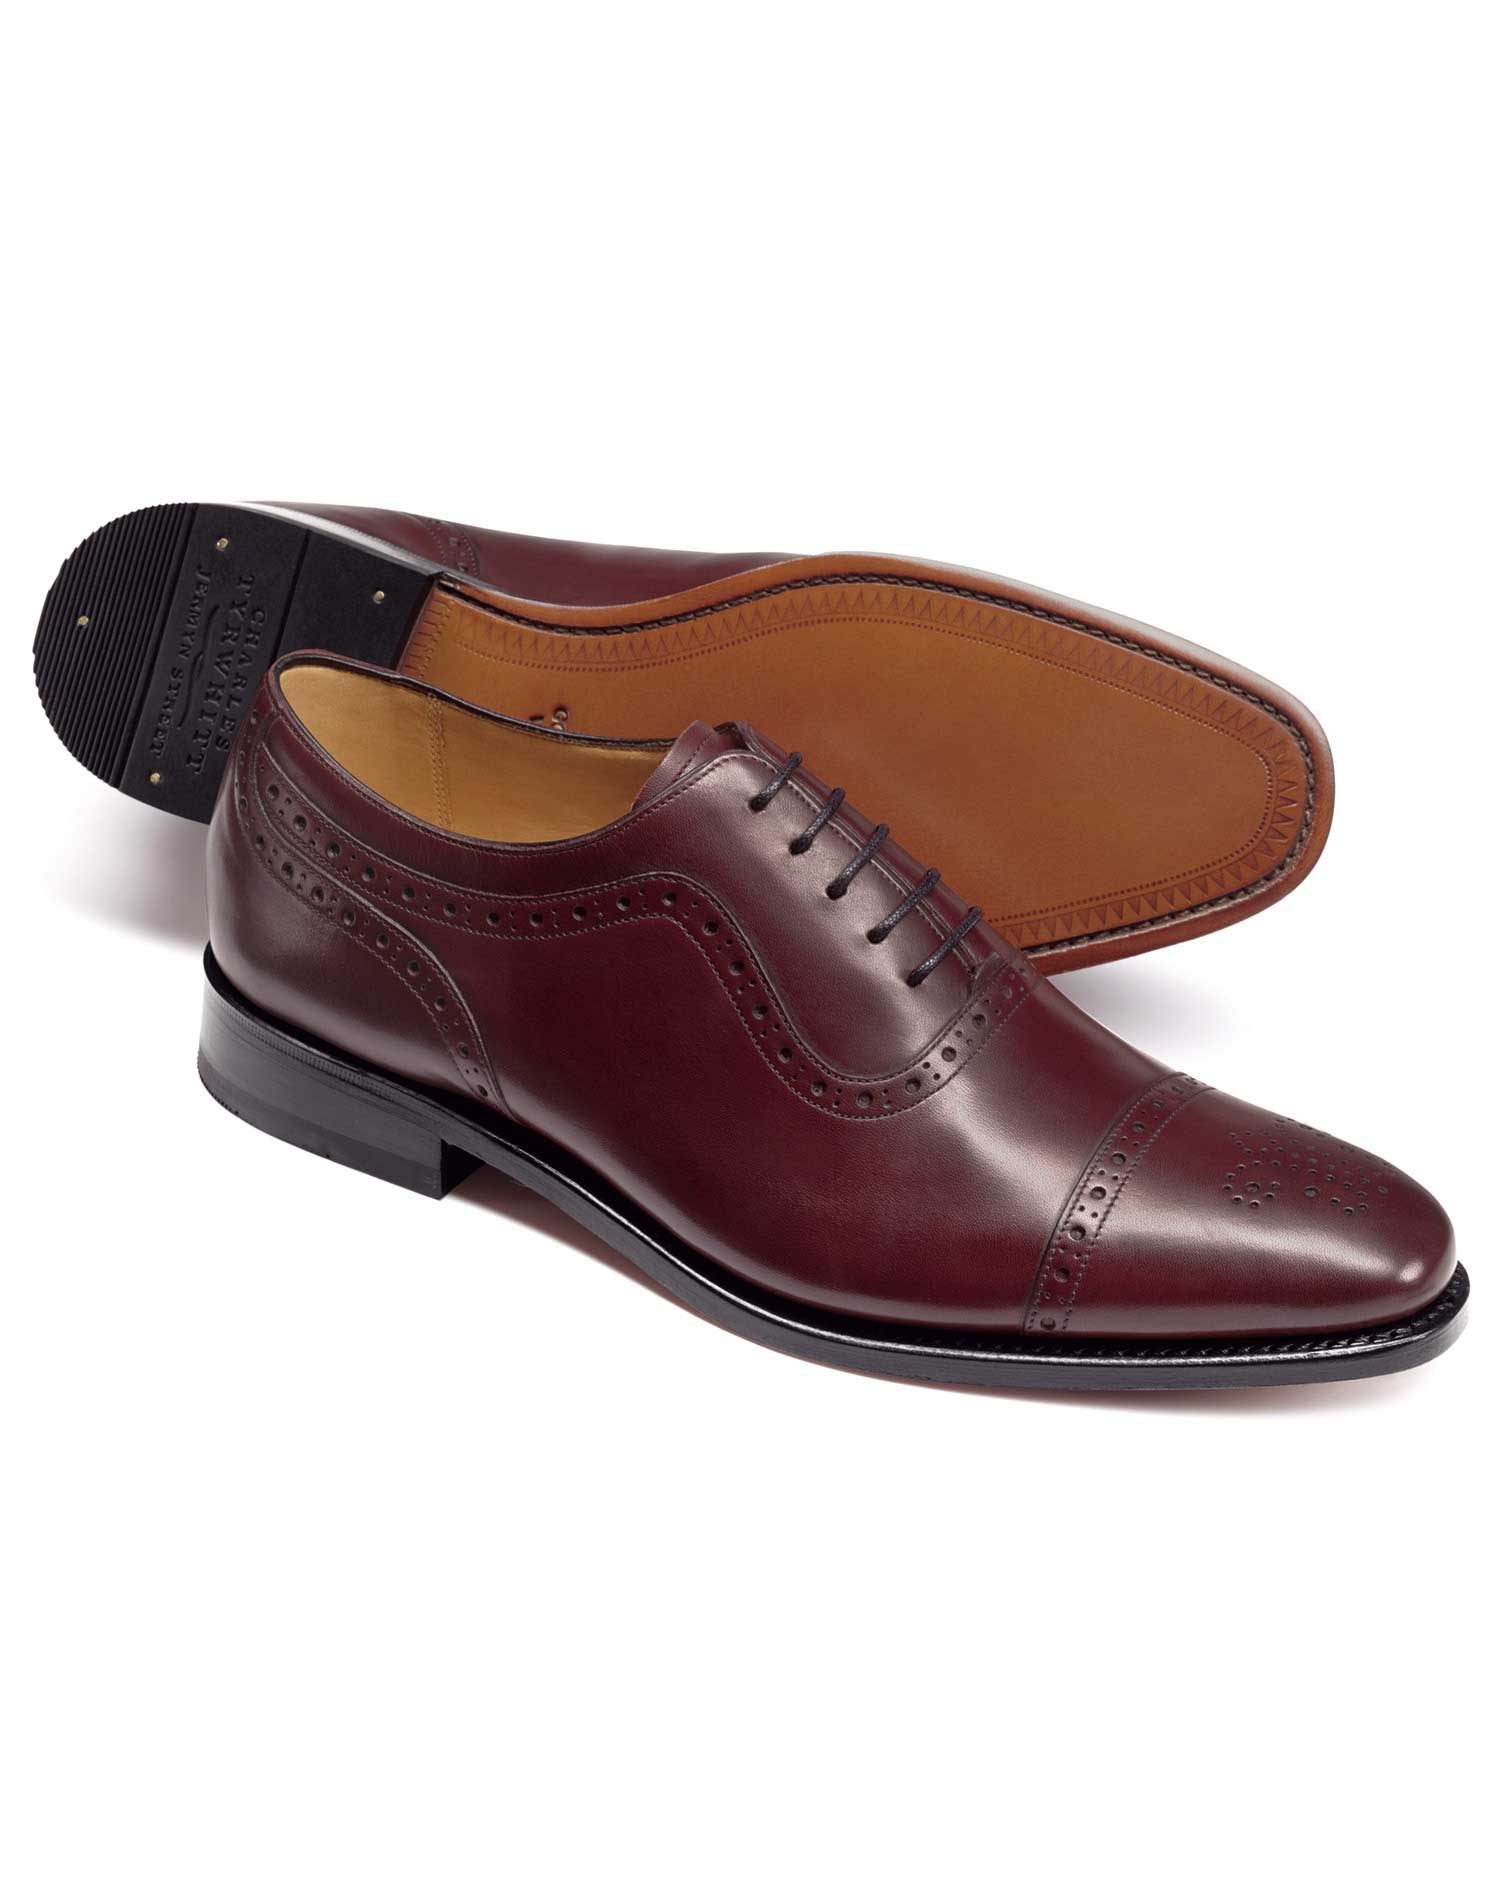 goodyear welted shoes sale